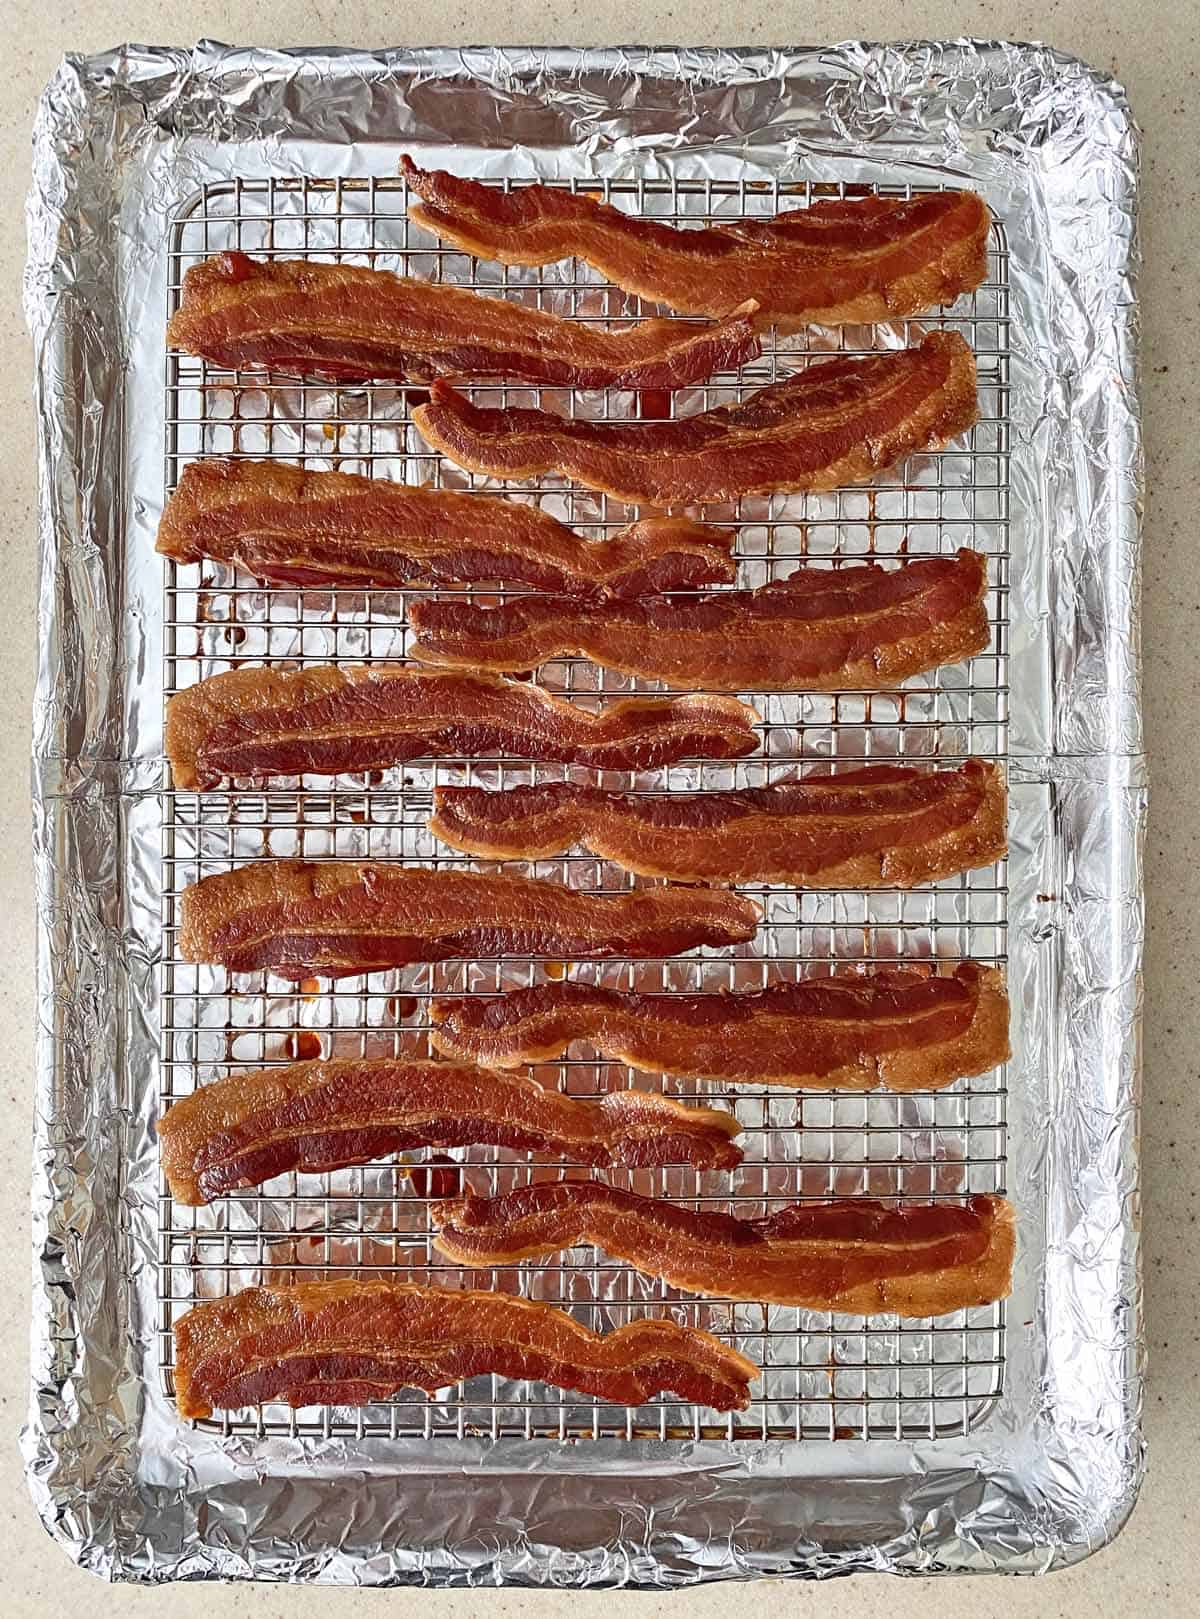 Fully cooked bacon jerky on a baking sheet, just after being pulled from the oven. 